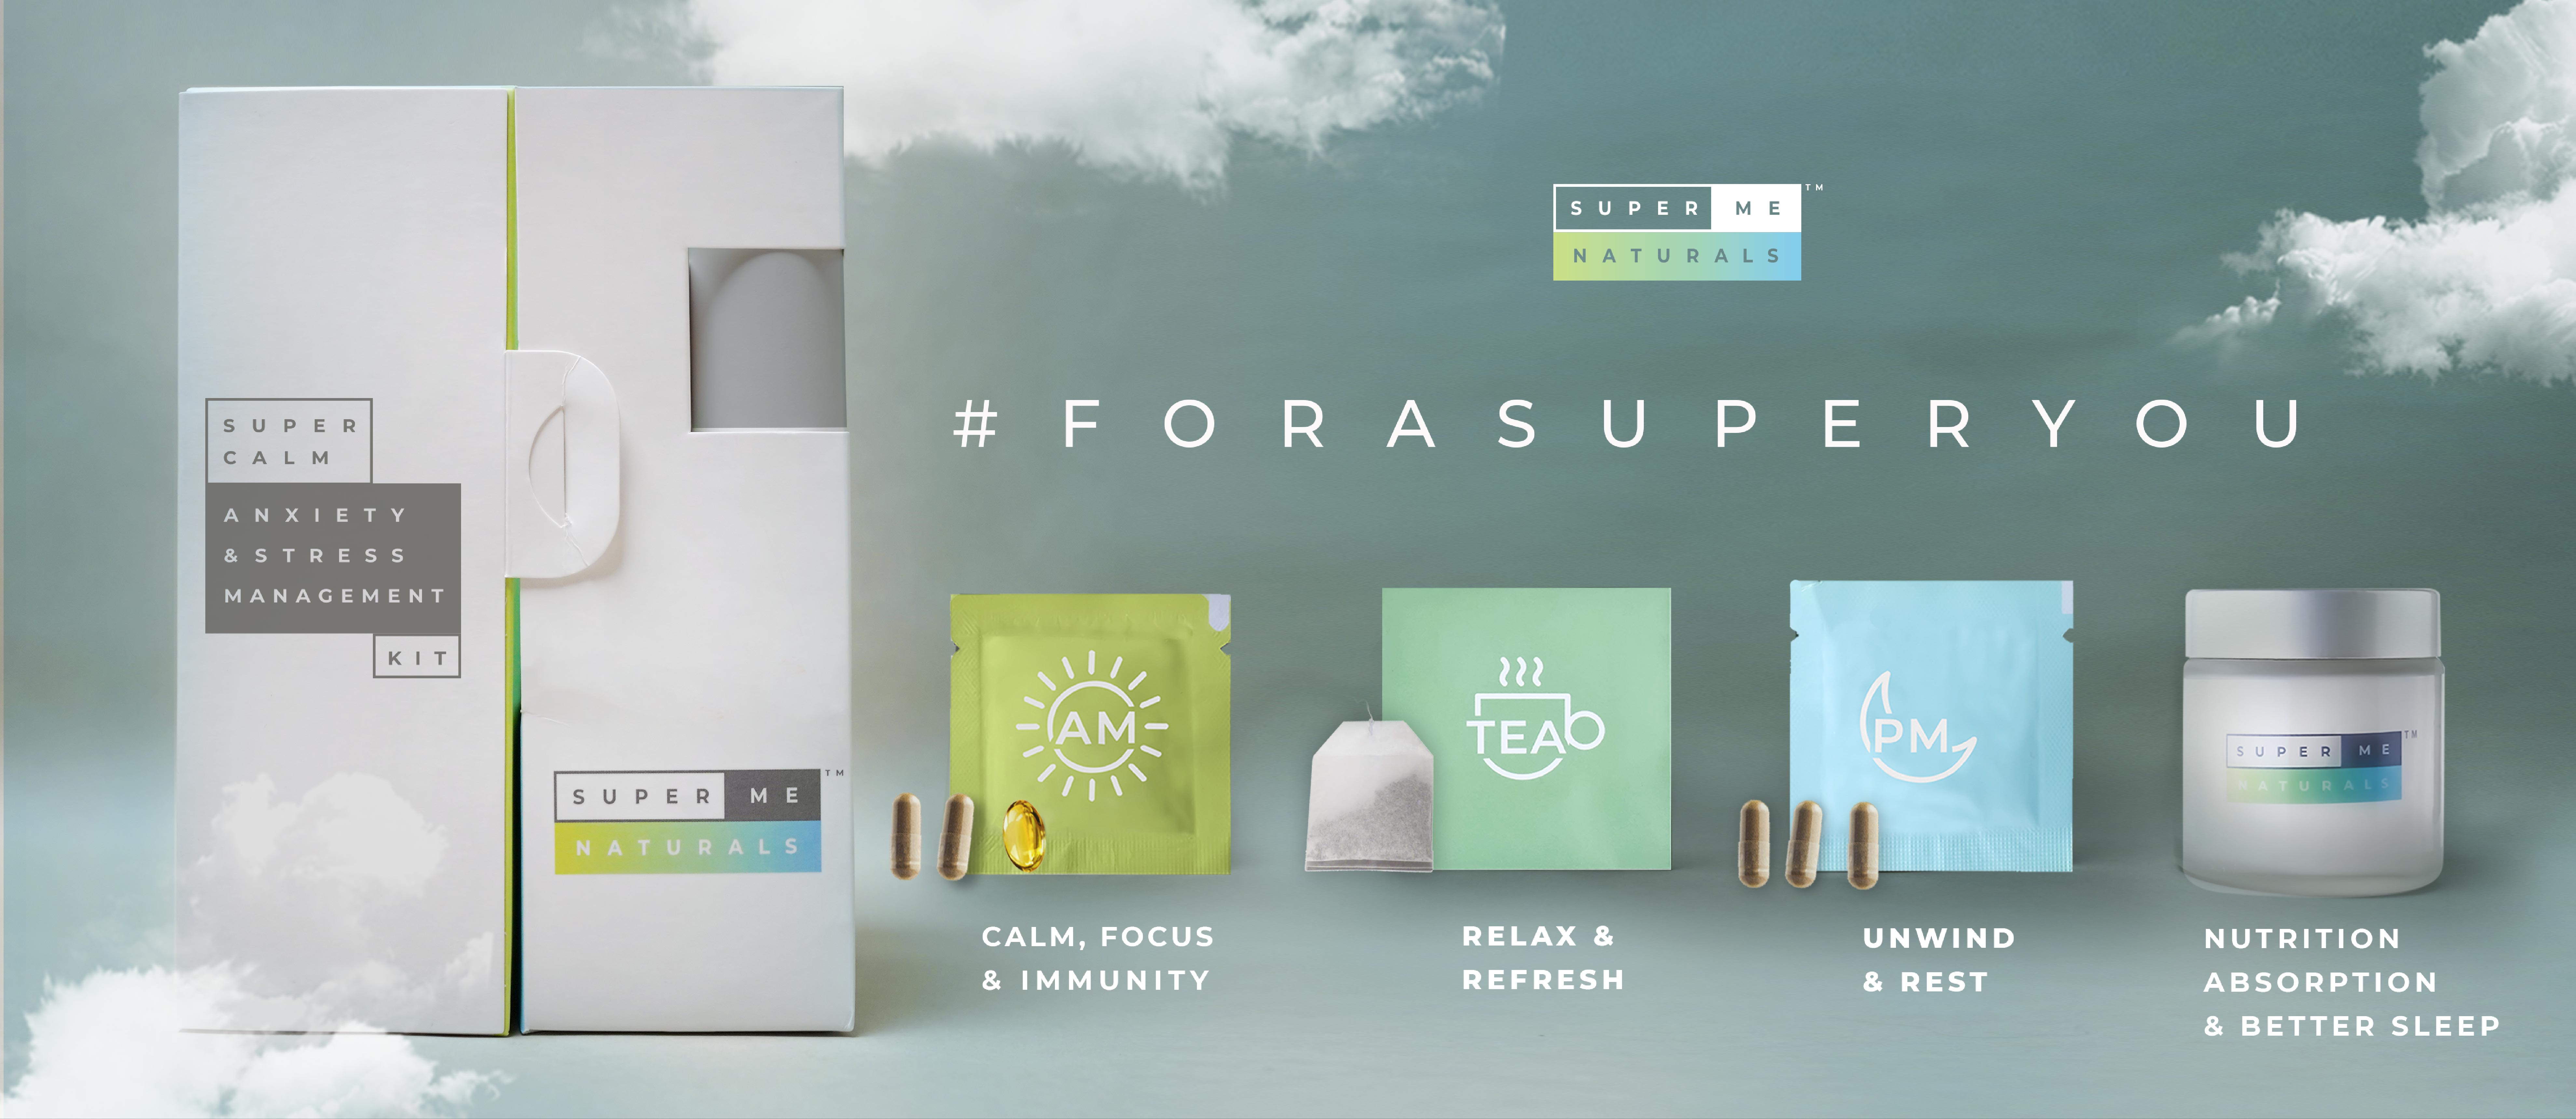 Super Me Naturals - Home Page banner